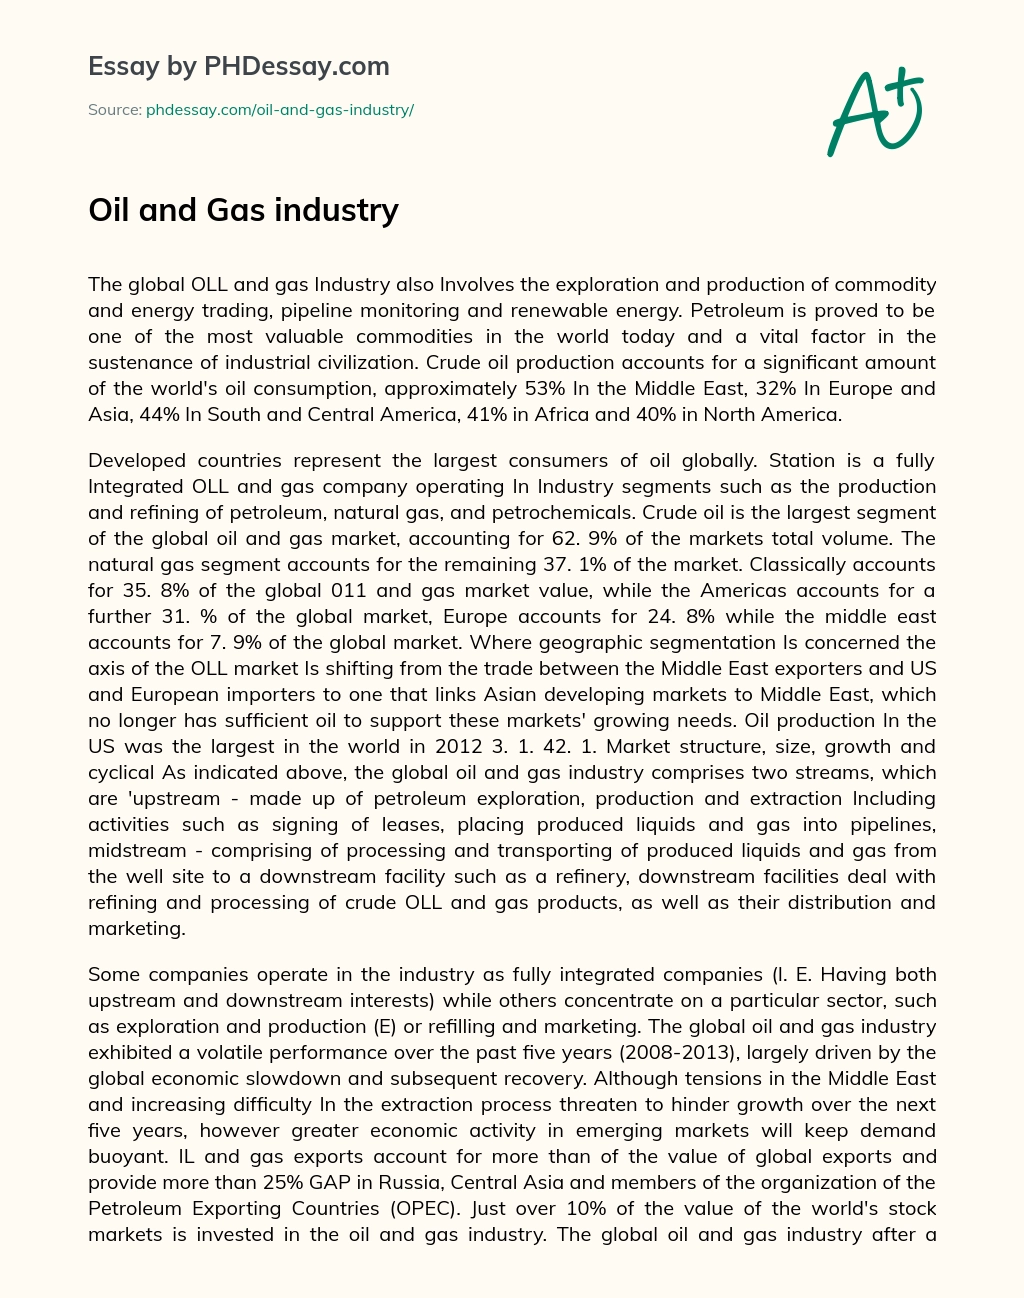 Oil and Gas industry essay